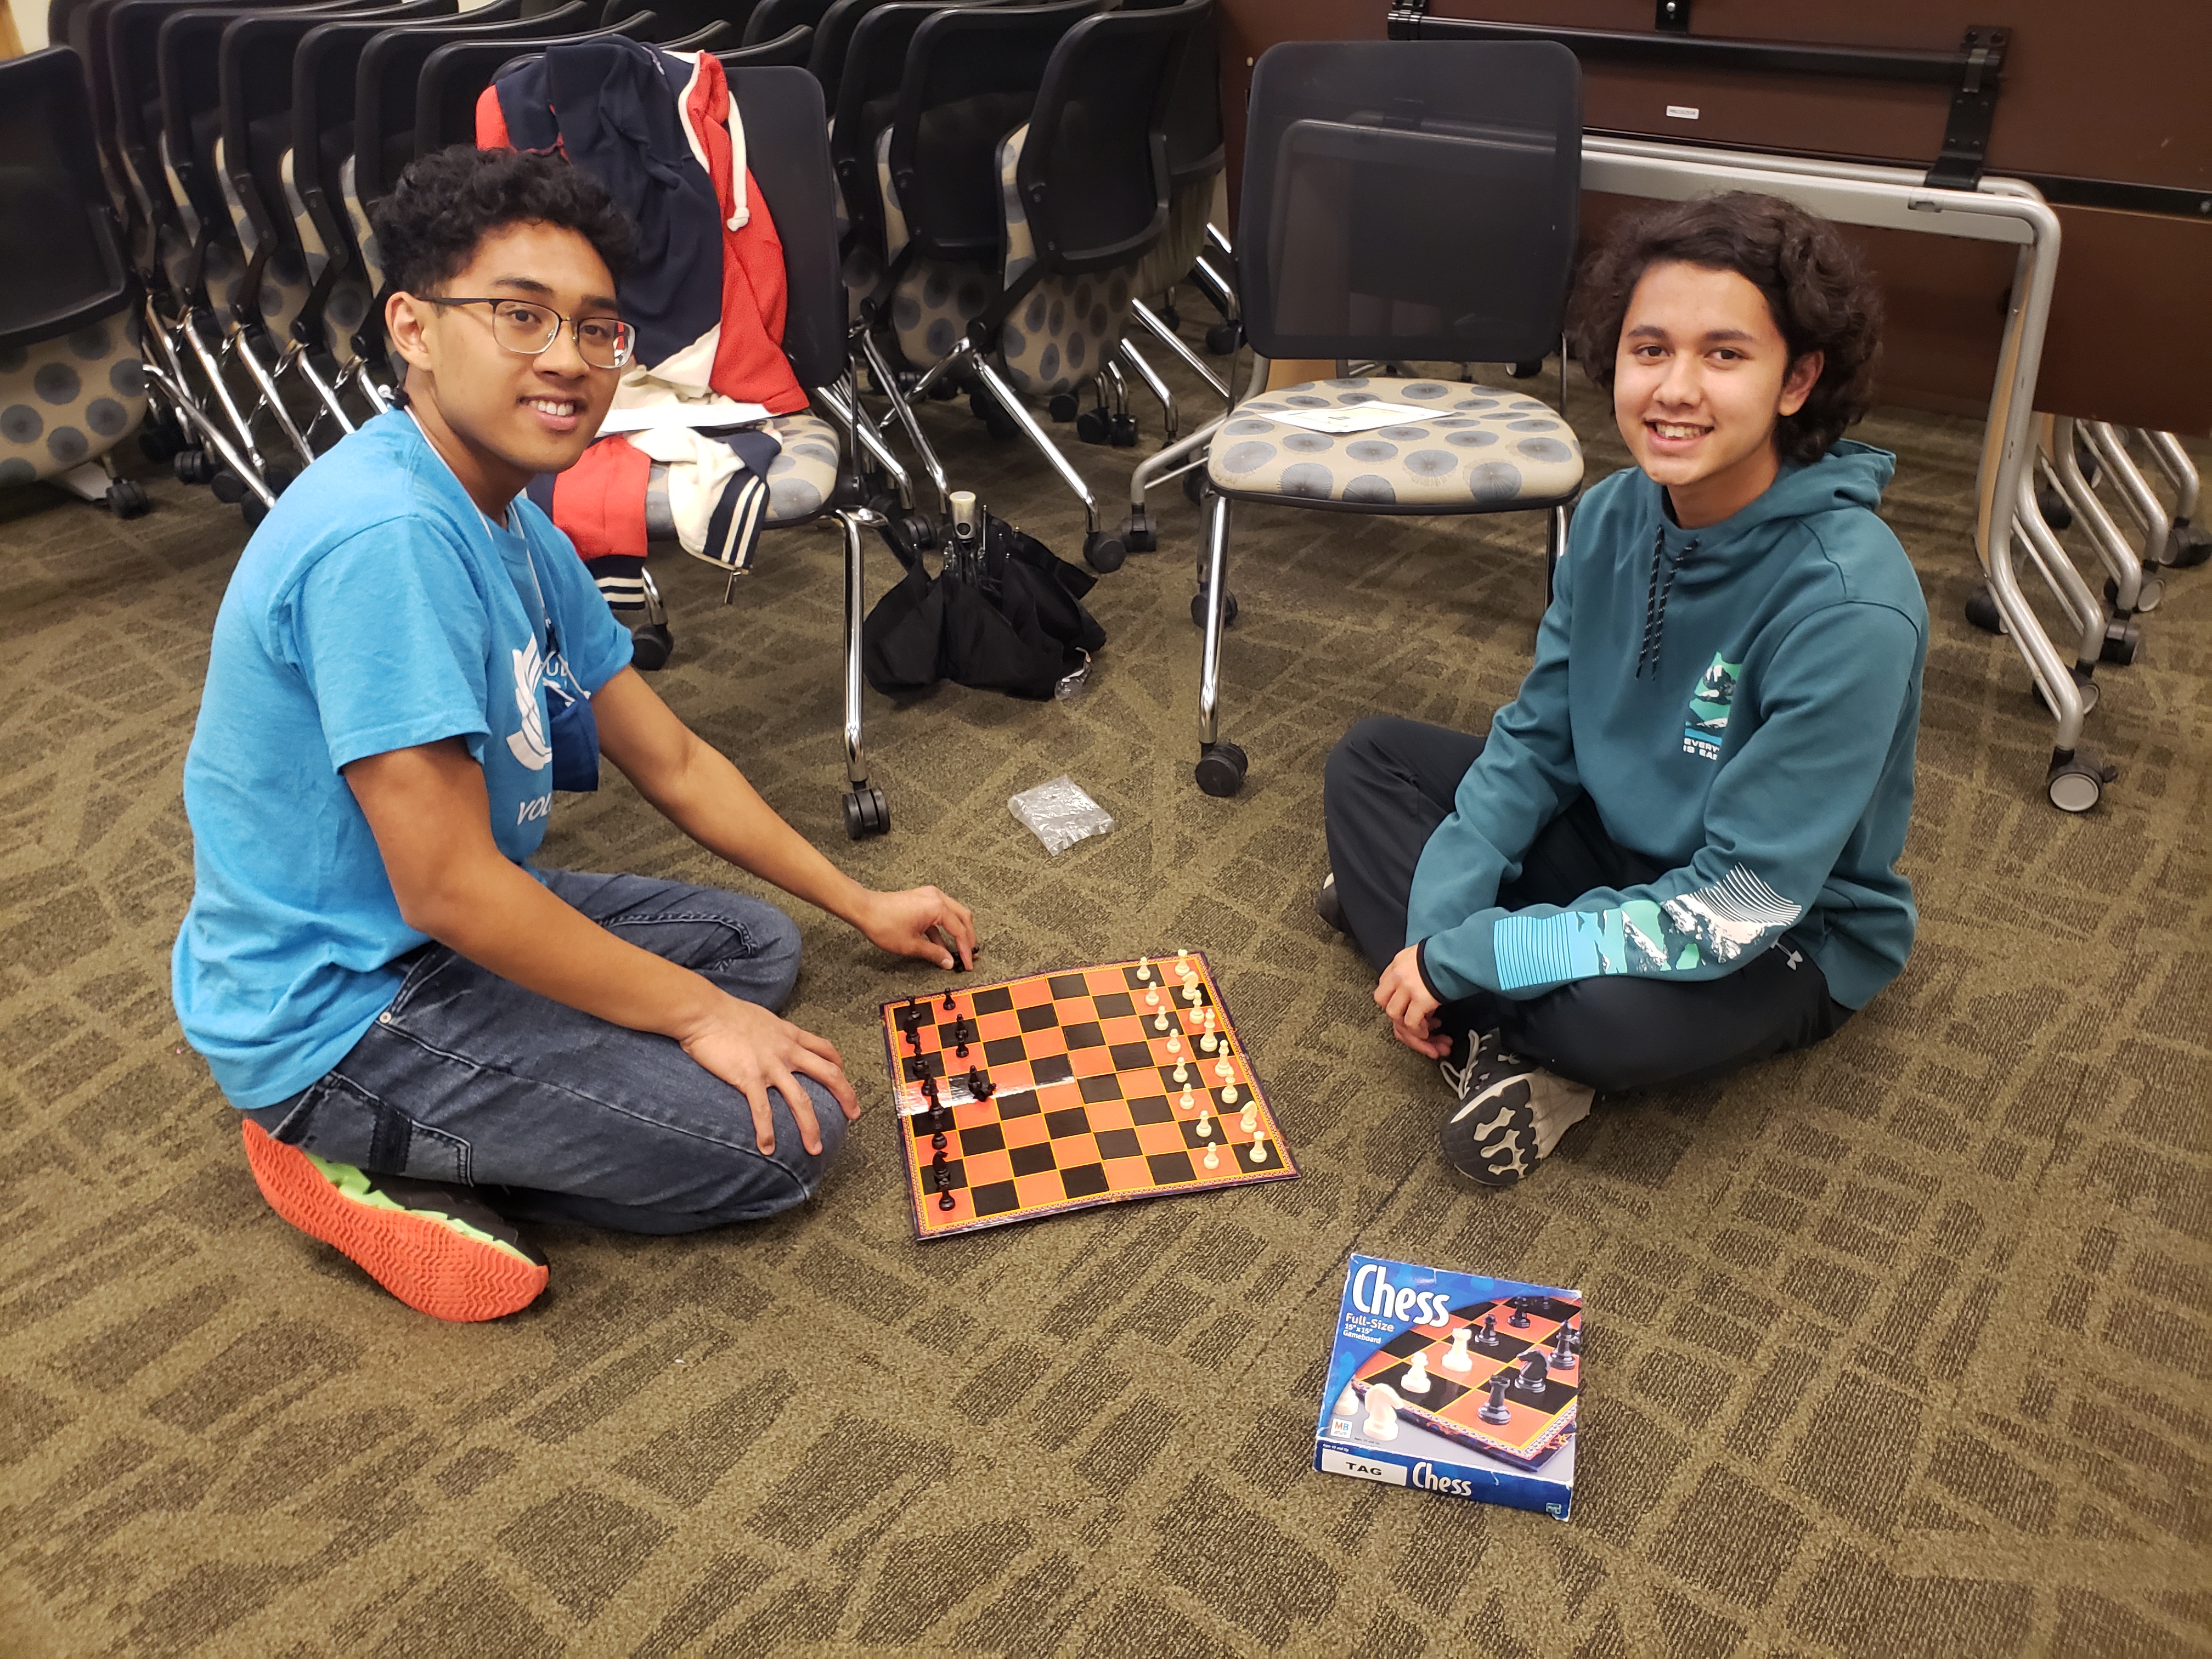 Two teens playing Chess